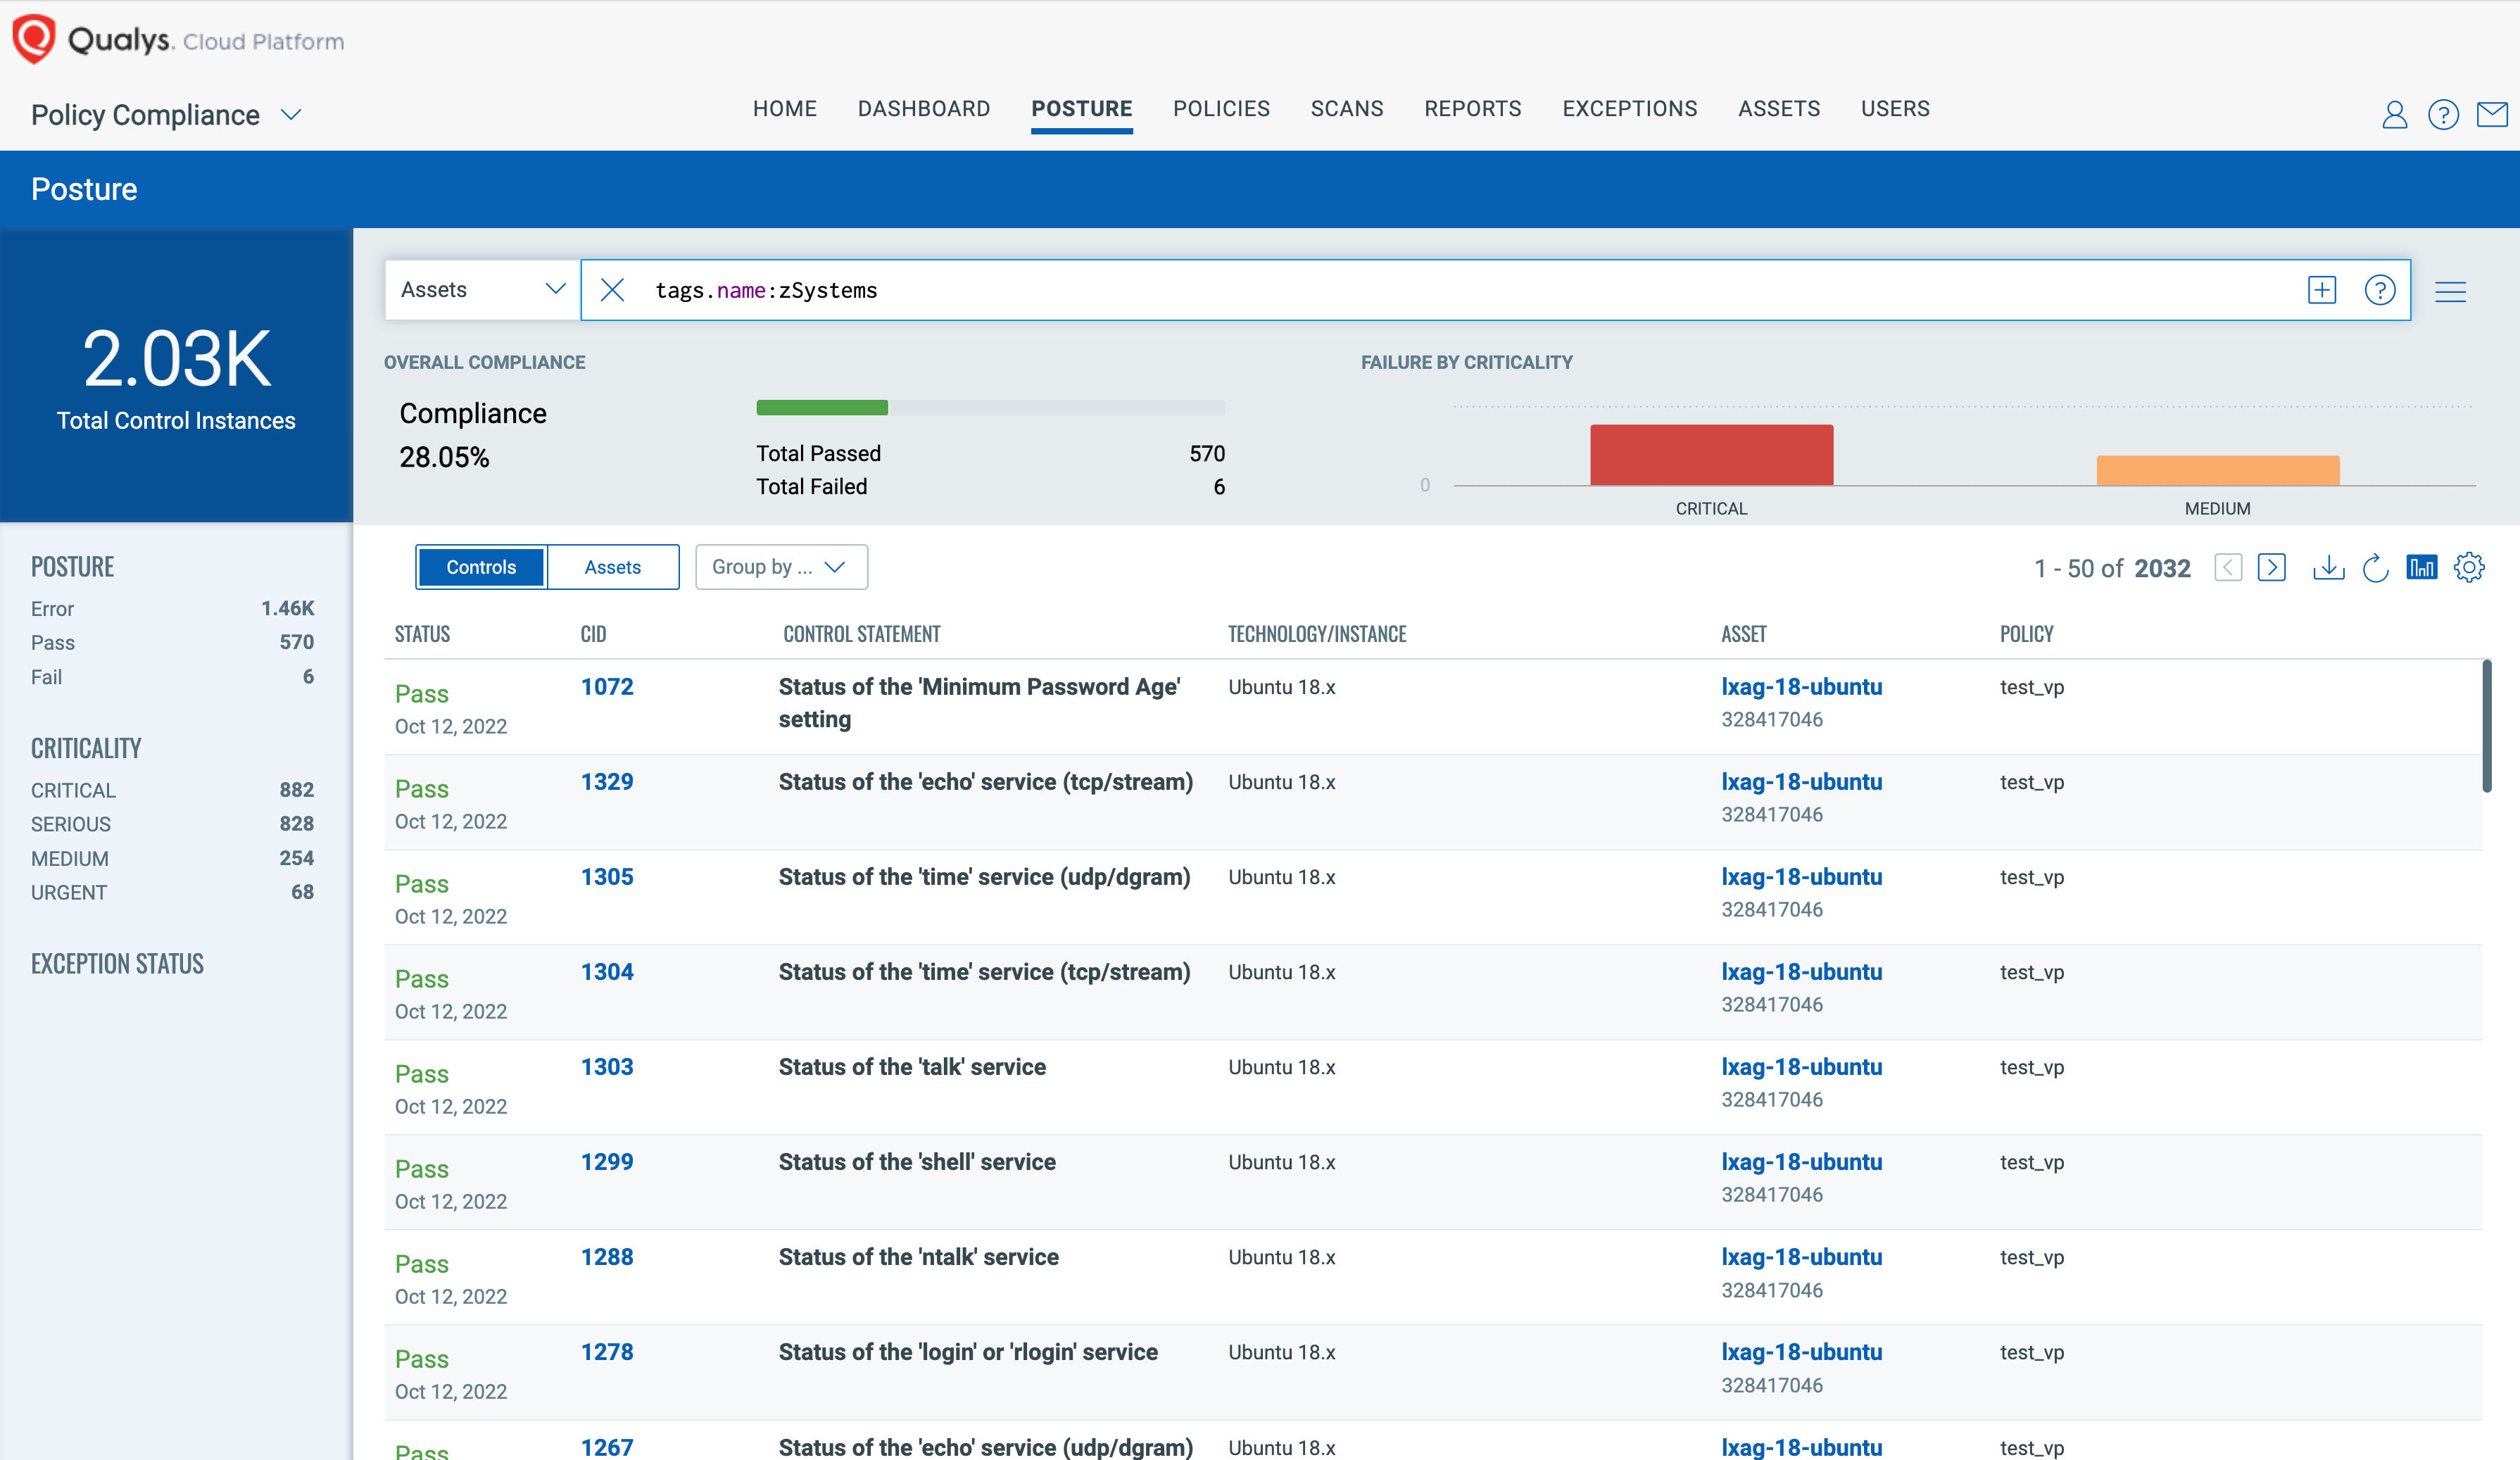 View of Posture tab from Qualys Policy Compliance (PC) UI
